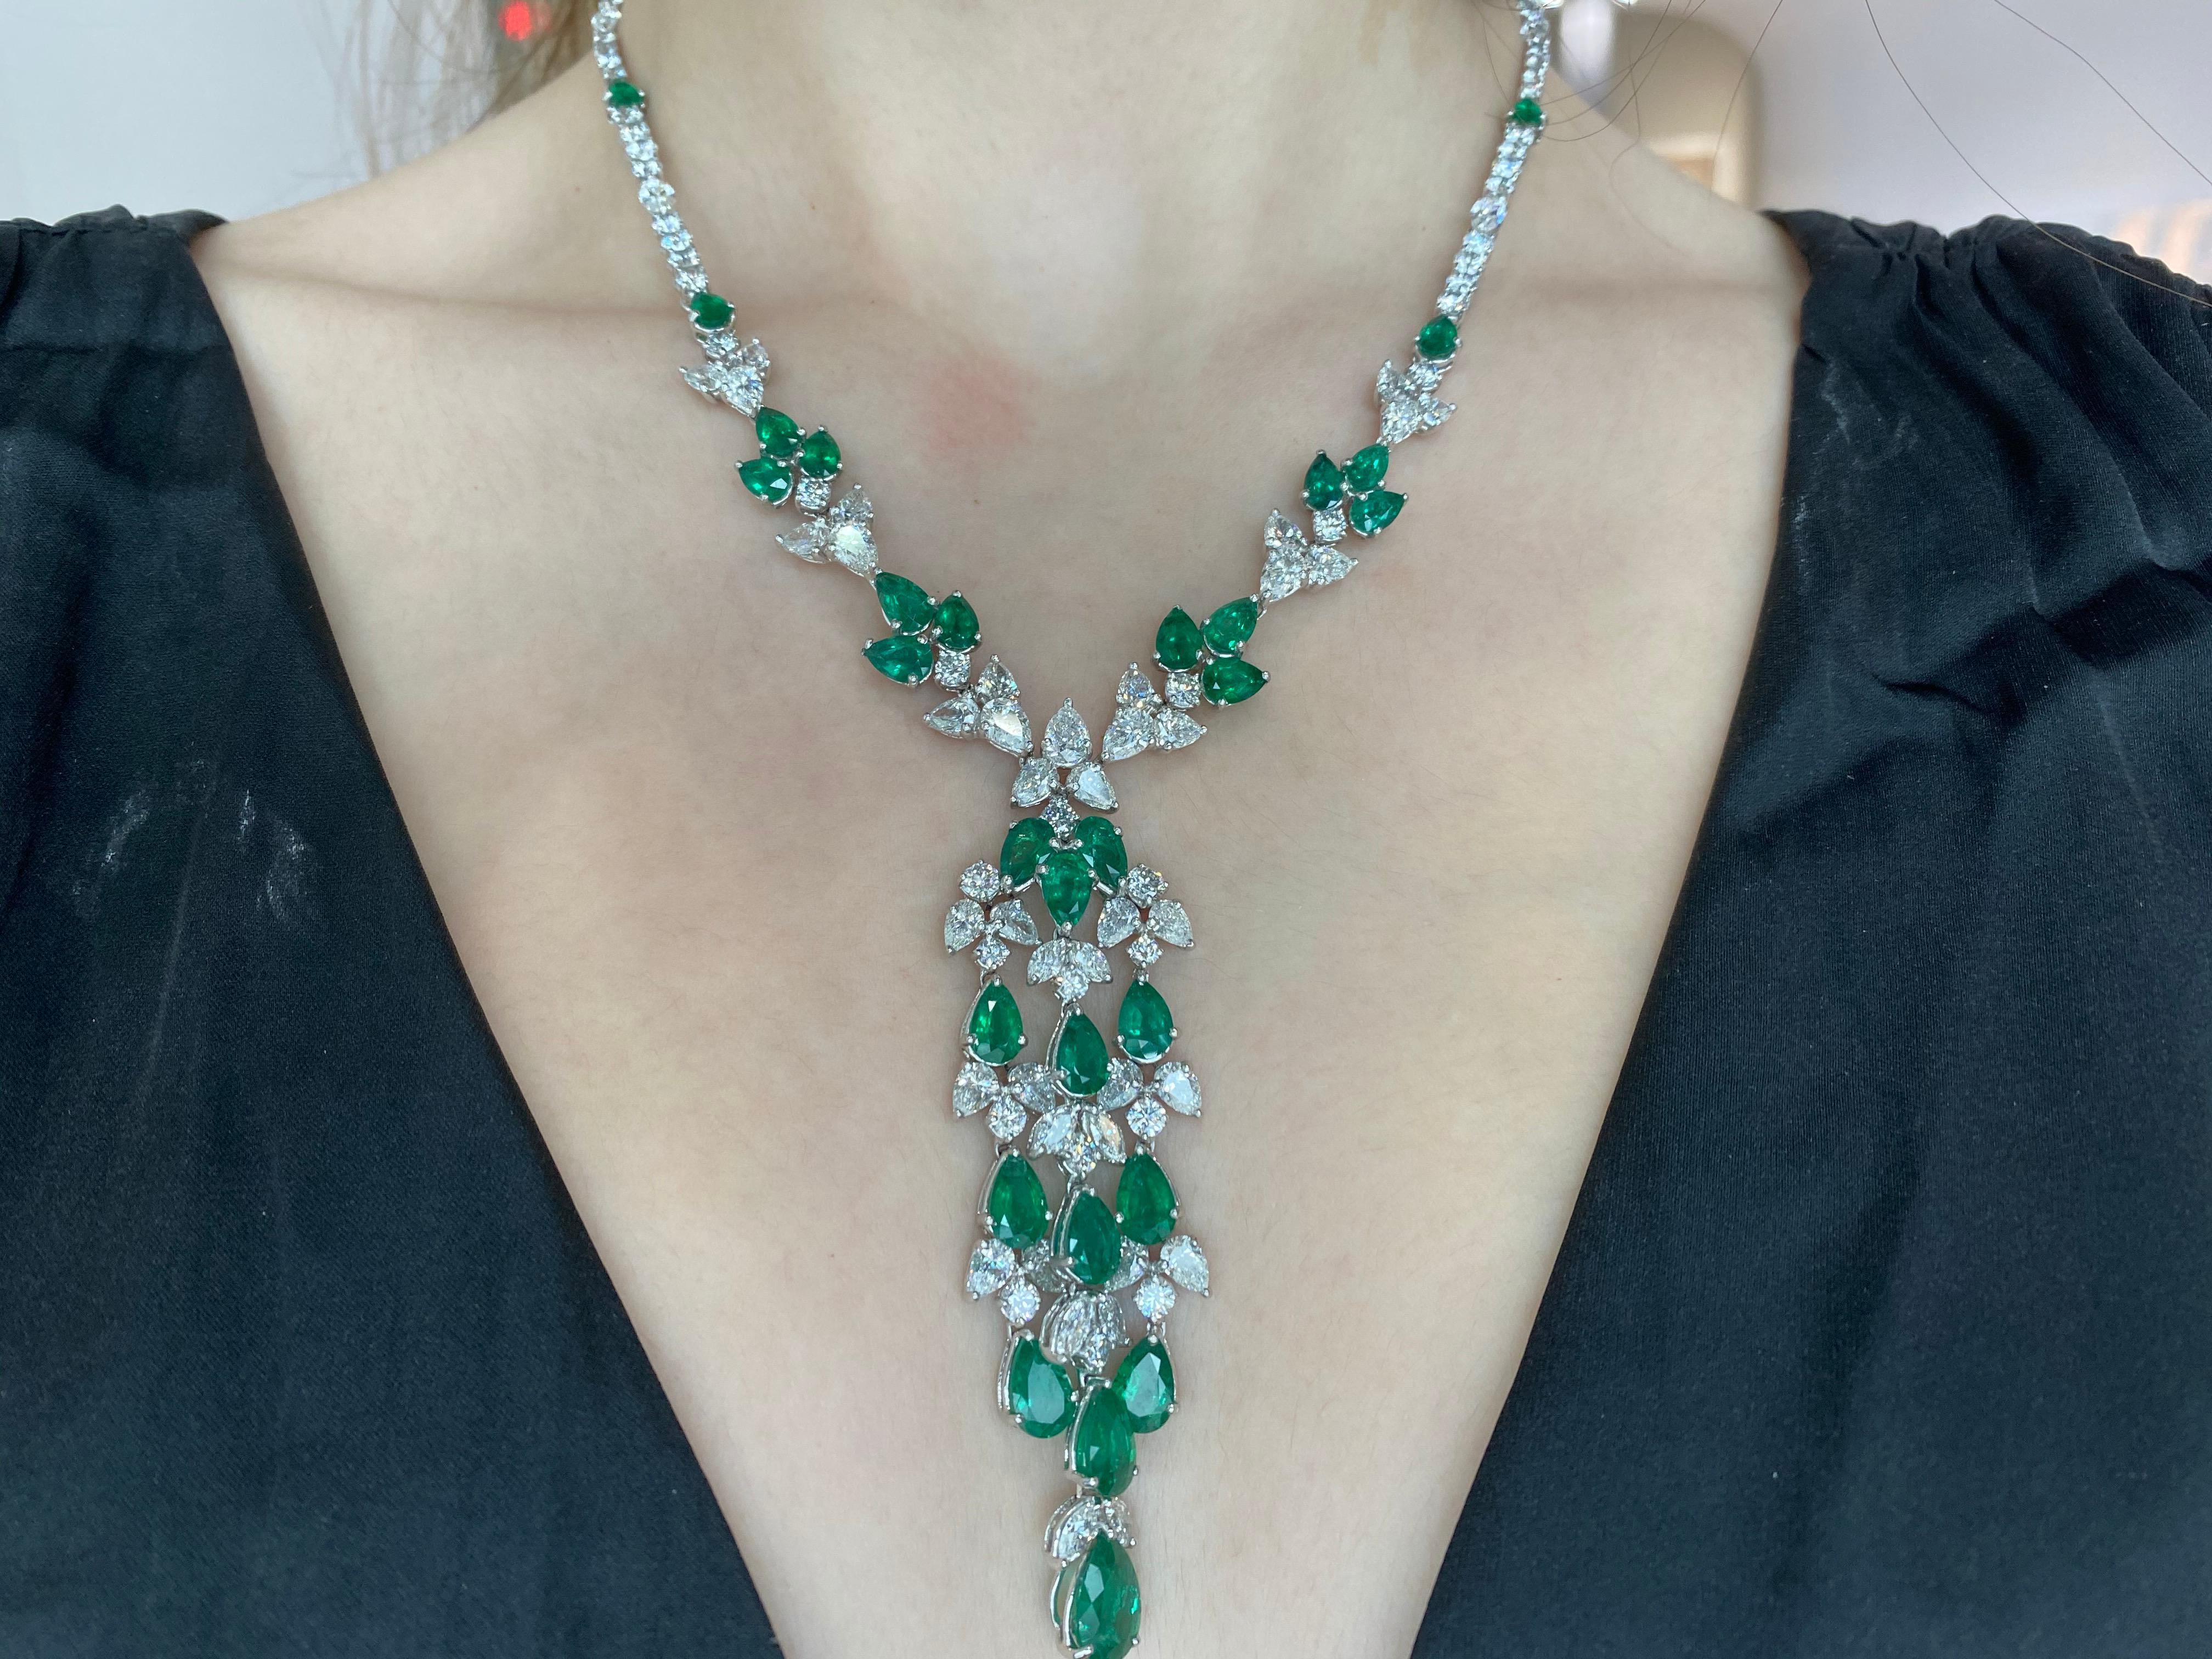 This absolutely exquisite necklace features 21.77ct total weight in stunning pear shape, richly saturated natural emeralds, 12 of them assembled in five simple lotus shapes along the chain, 10 of them dripping down in three smaller vines. The lotus